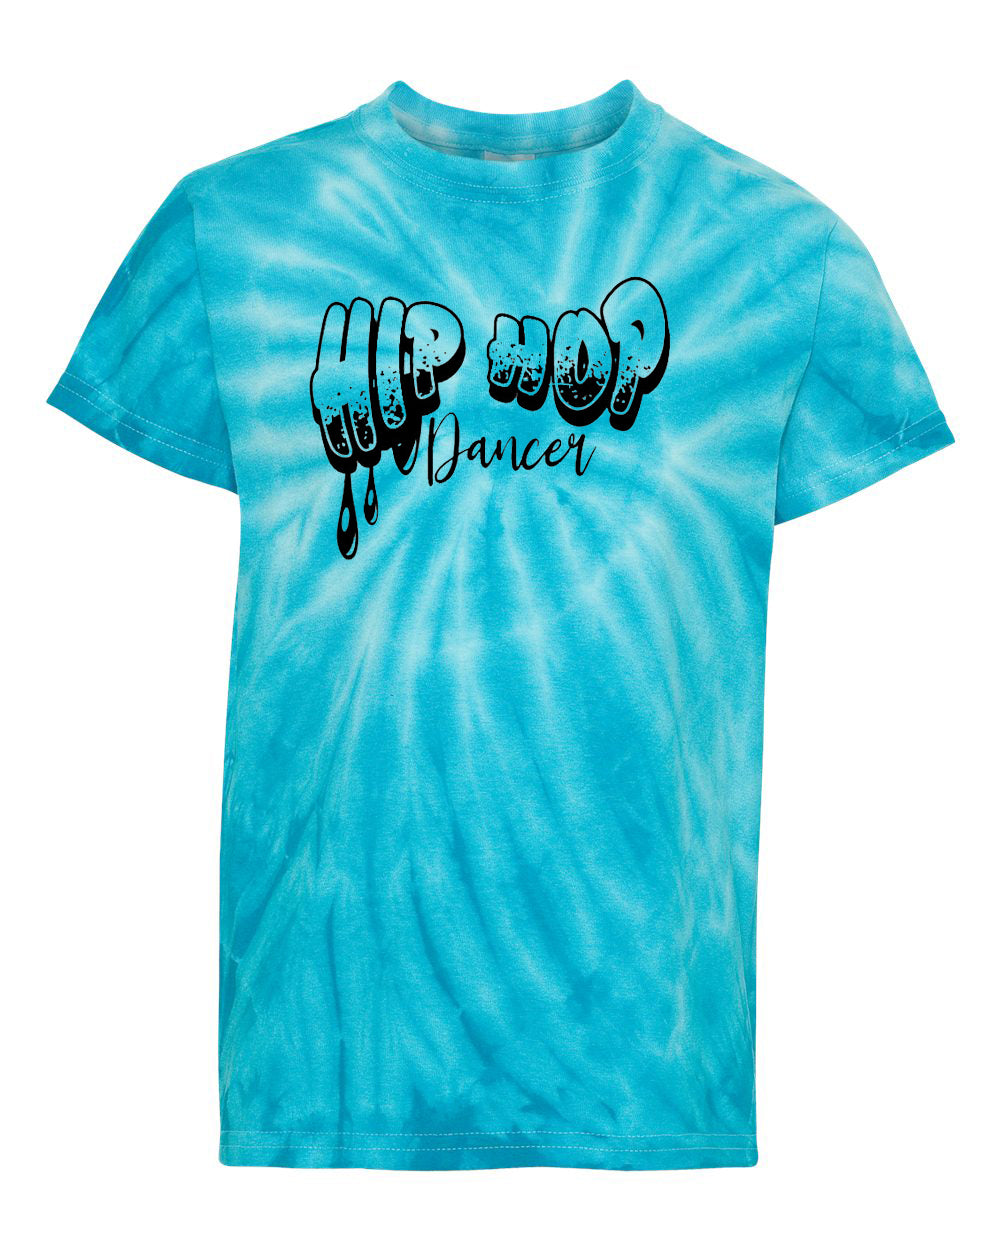 Hip Hop Dancer Youth Tie Dye T-Shirt Turquoise